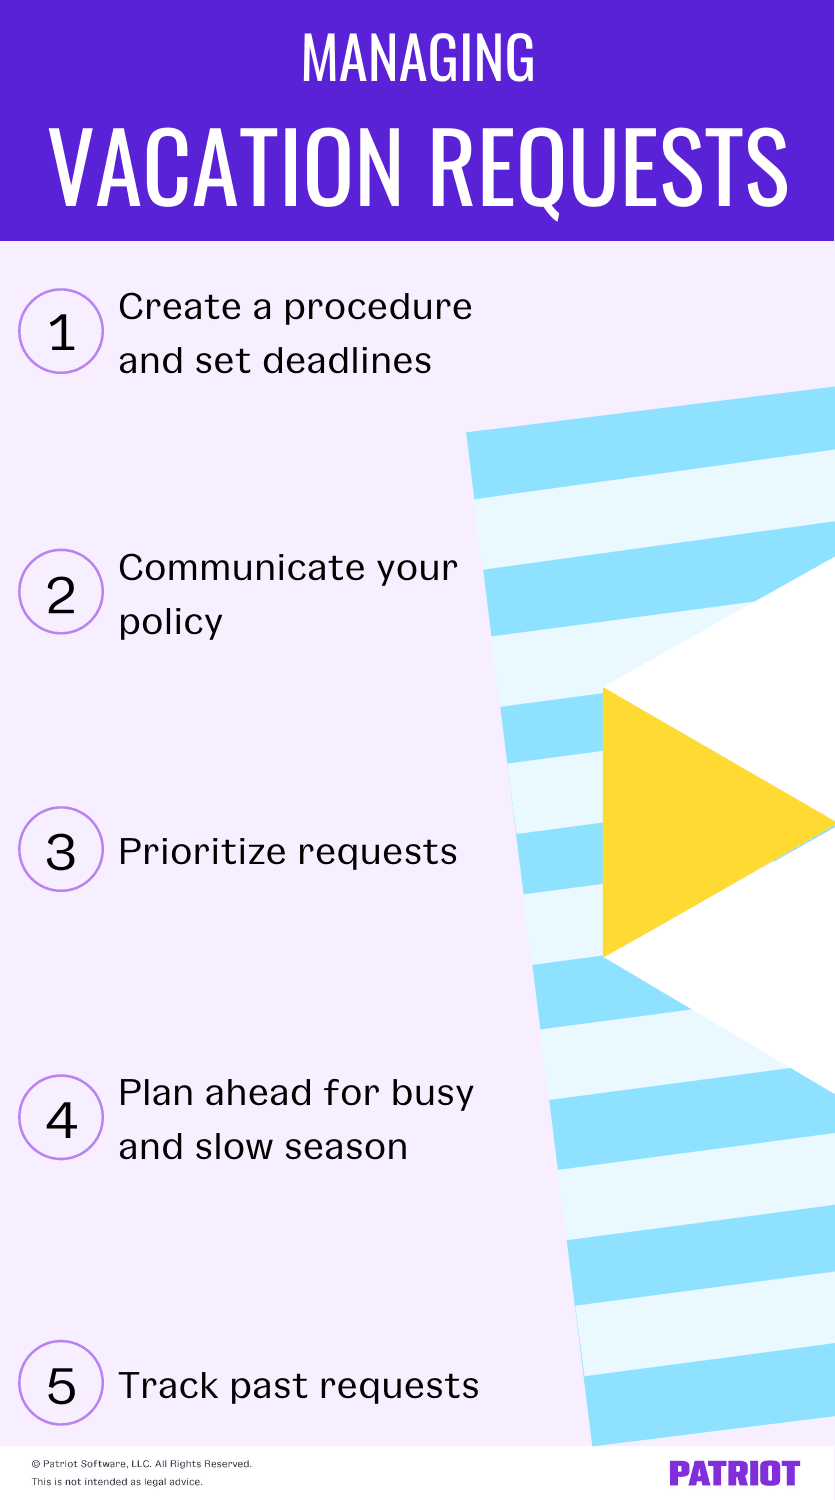 managing vacation requests: Create a procedure and set deadlines, communicate your policy, prioritize requests, plan ahead for busy and slow season, track past requests